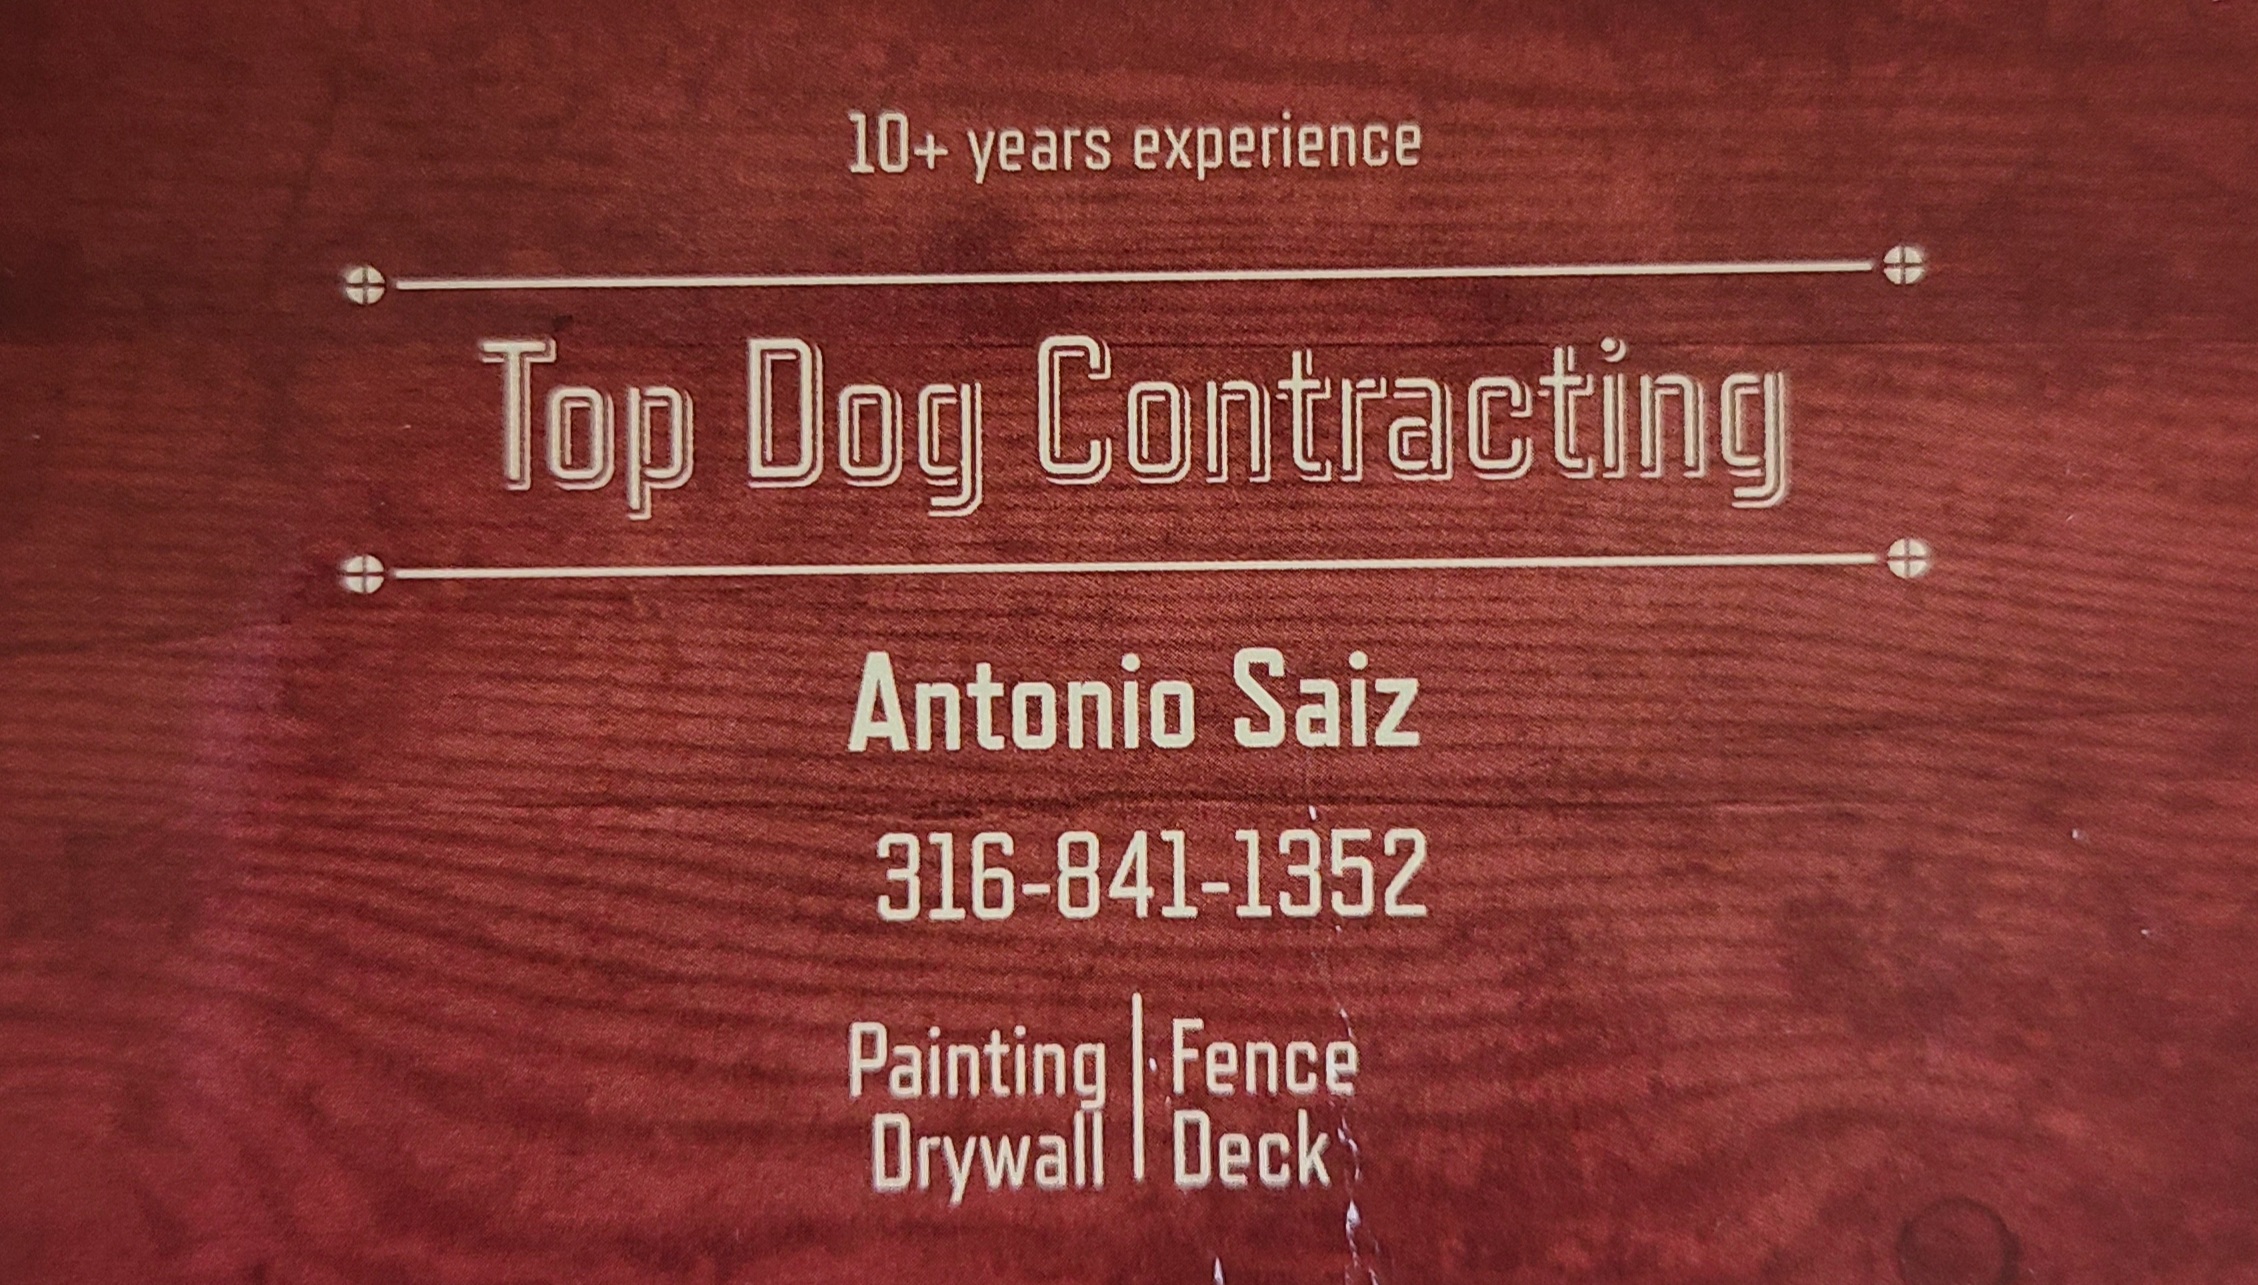 Top Dog Contracting Logo